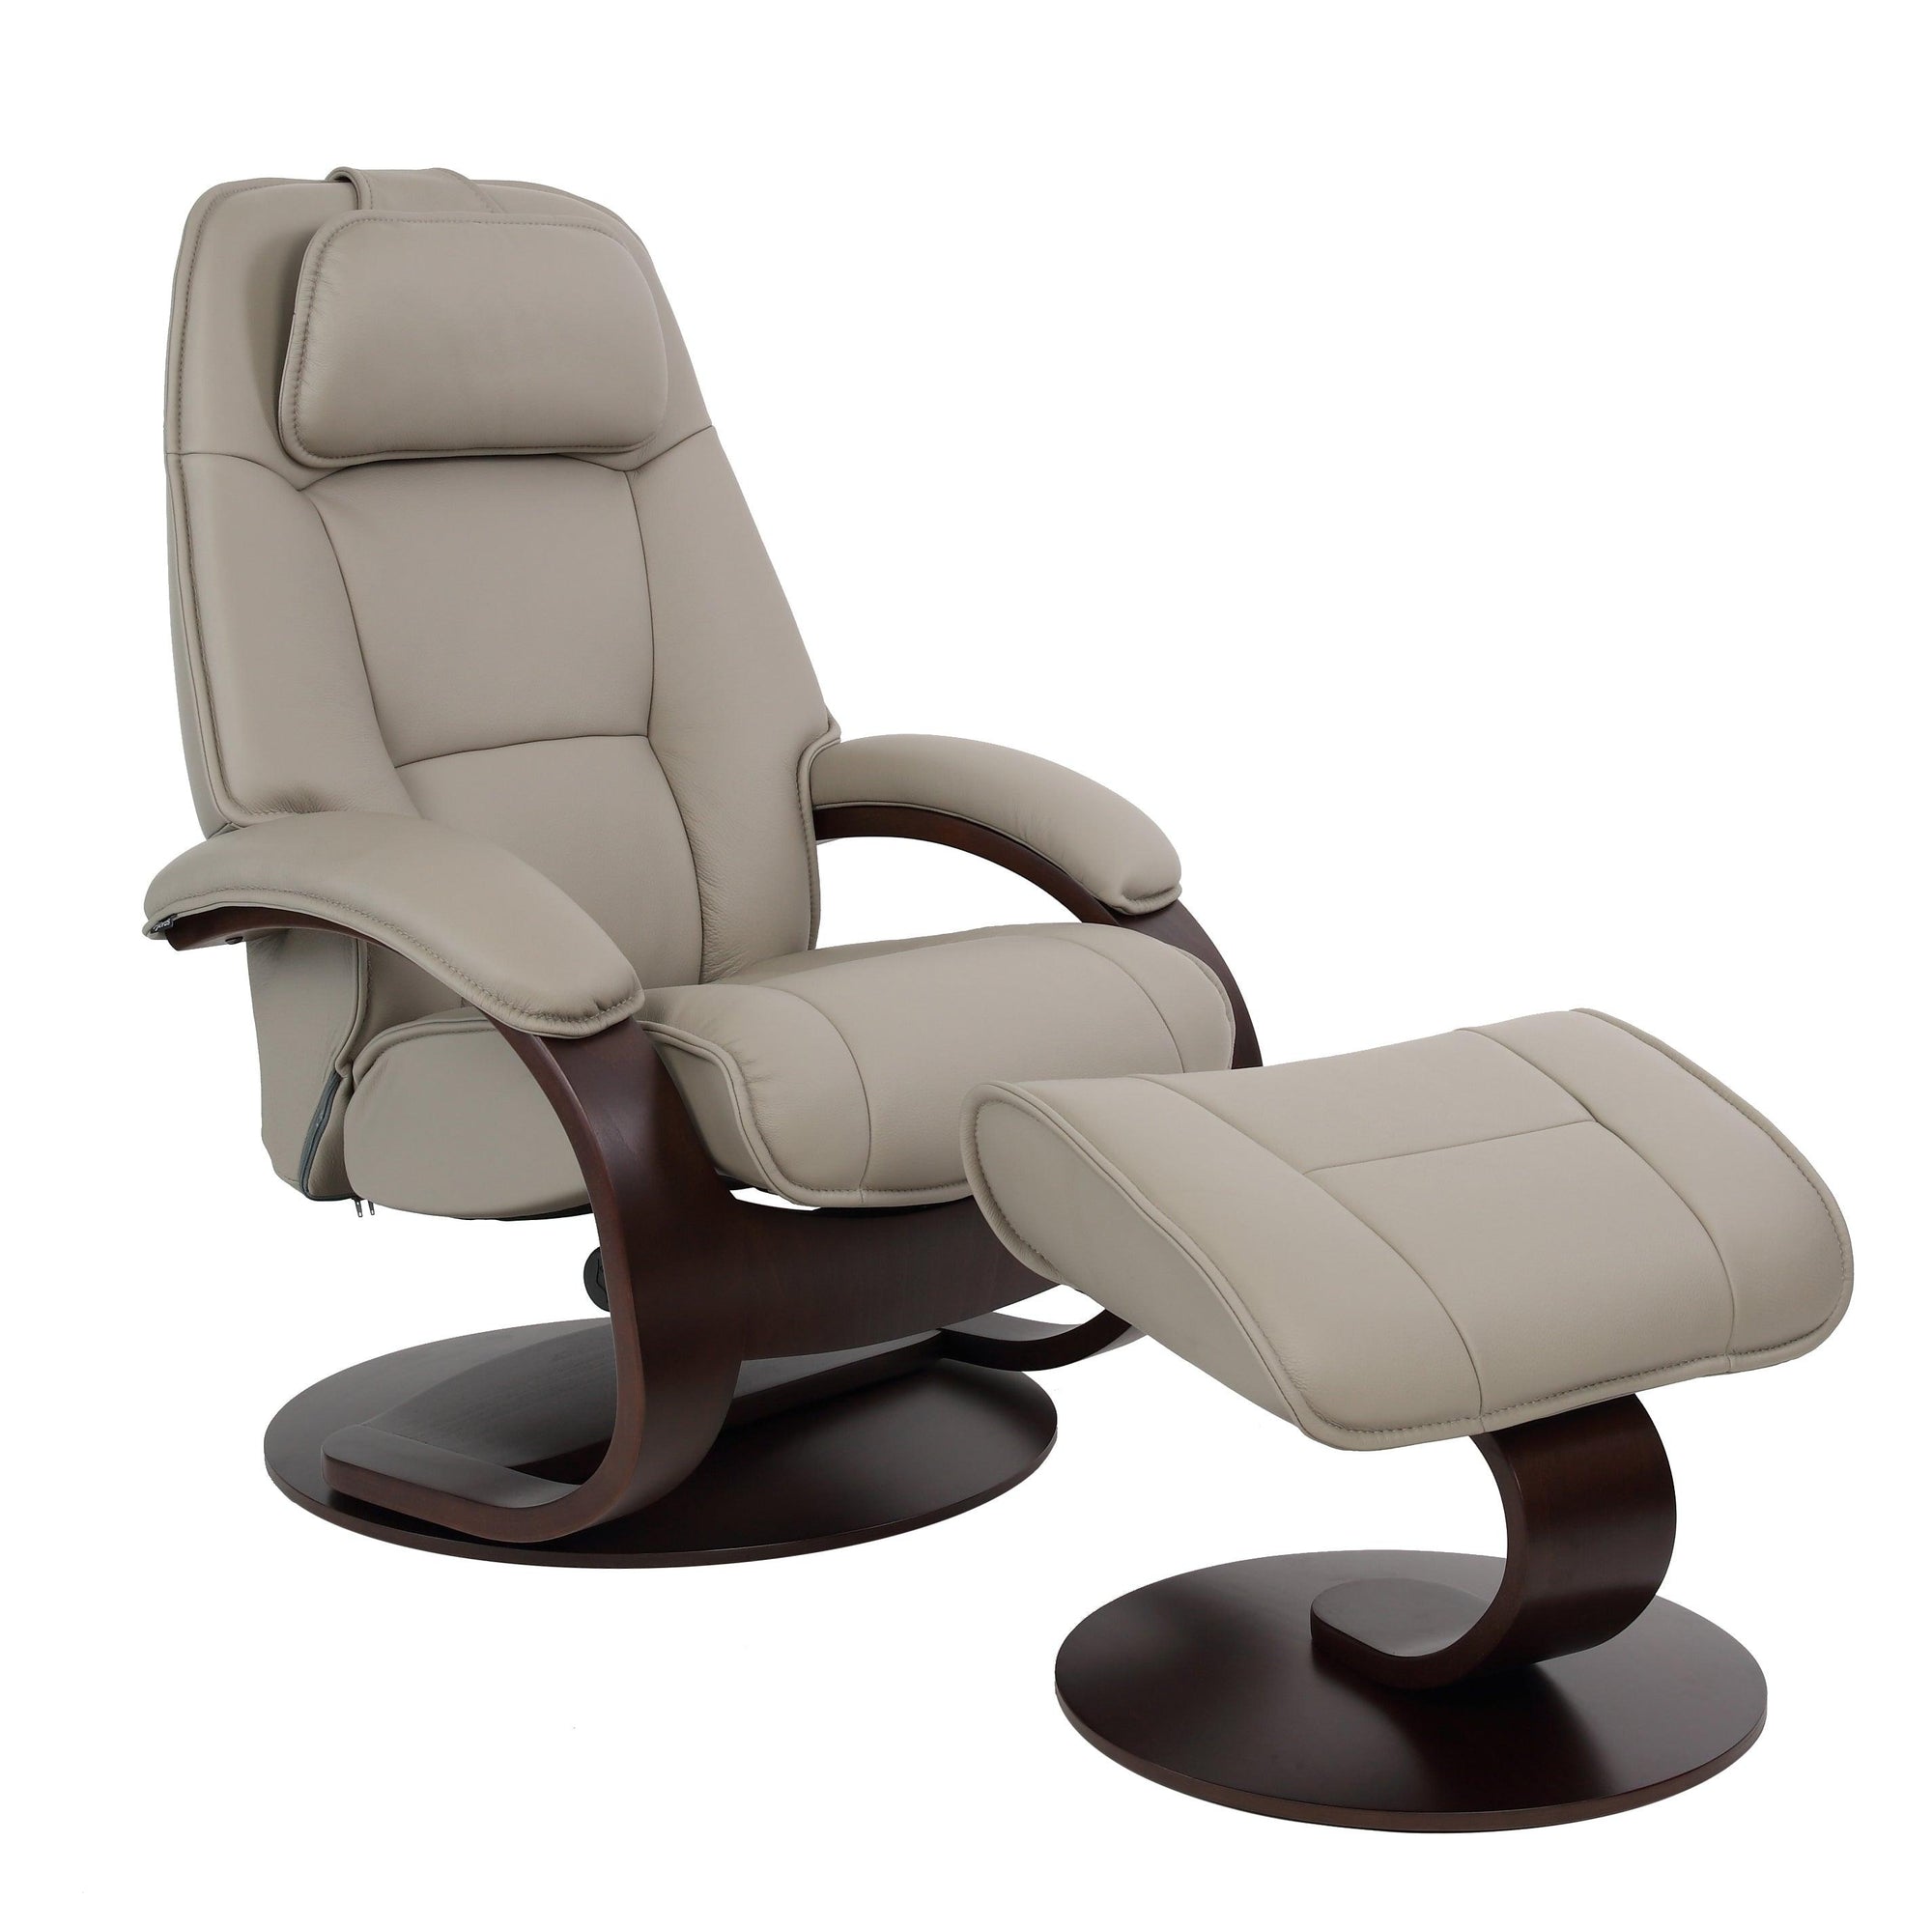 Admiral C Leather Reclining Chair in Cement - Euro Living Furniture